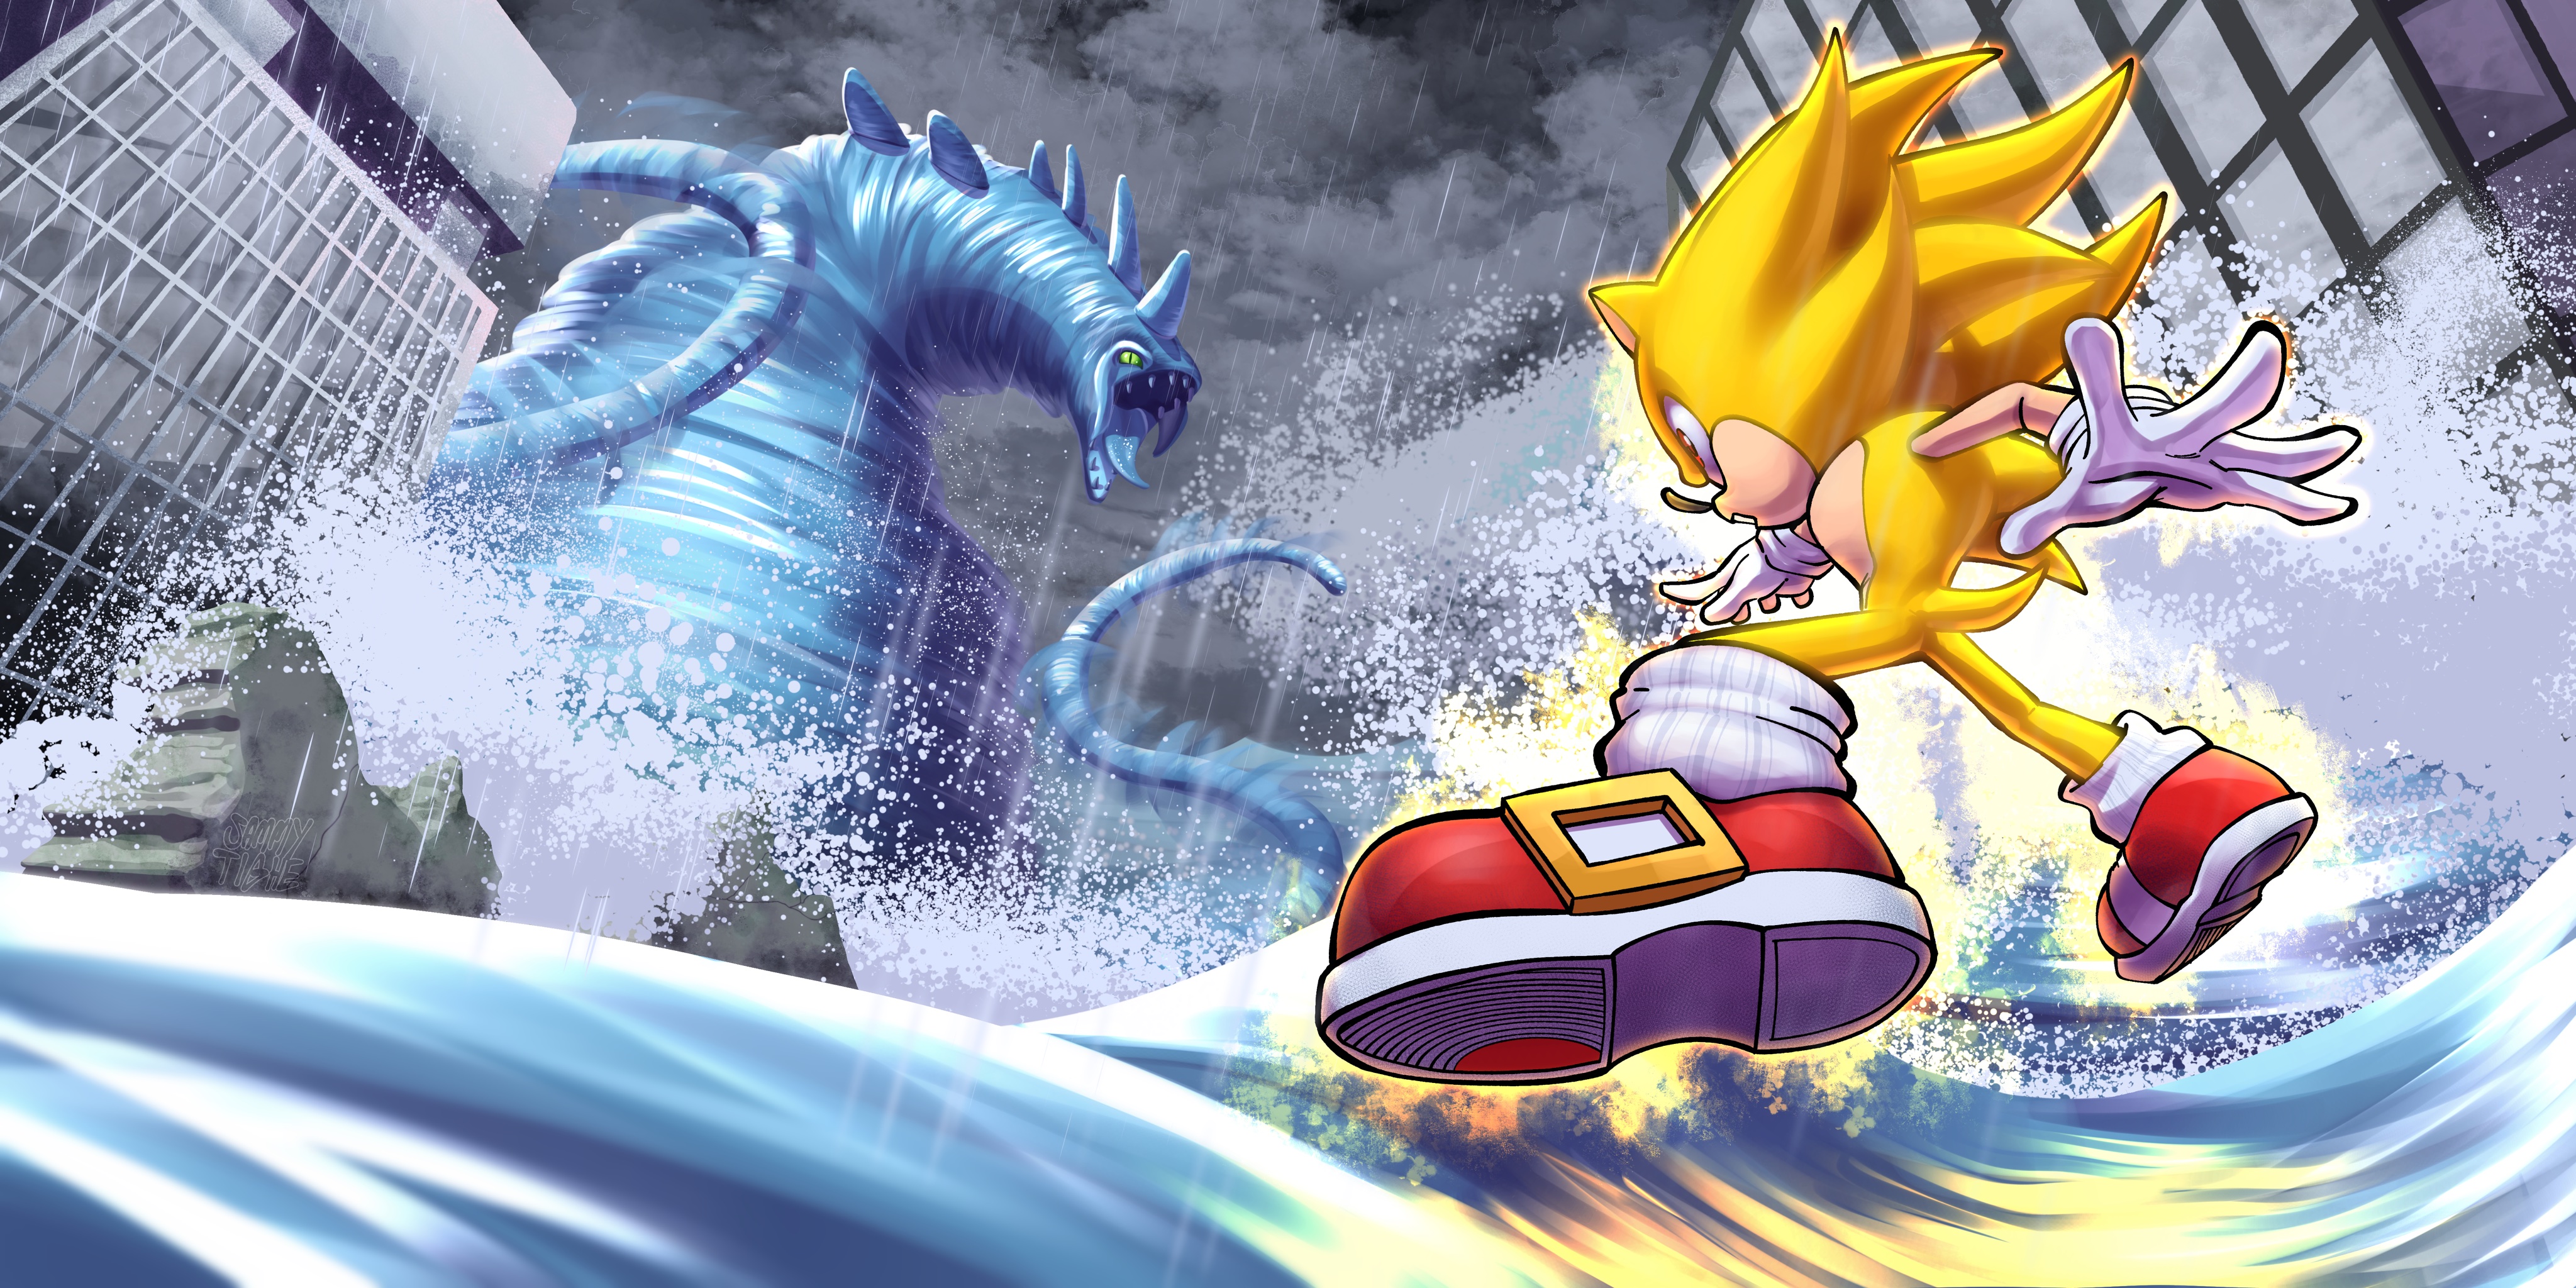 sonic and chaos the Hedgehog Wallpaper